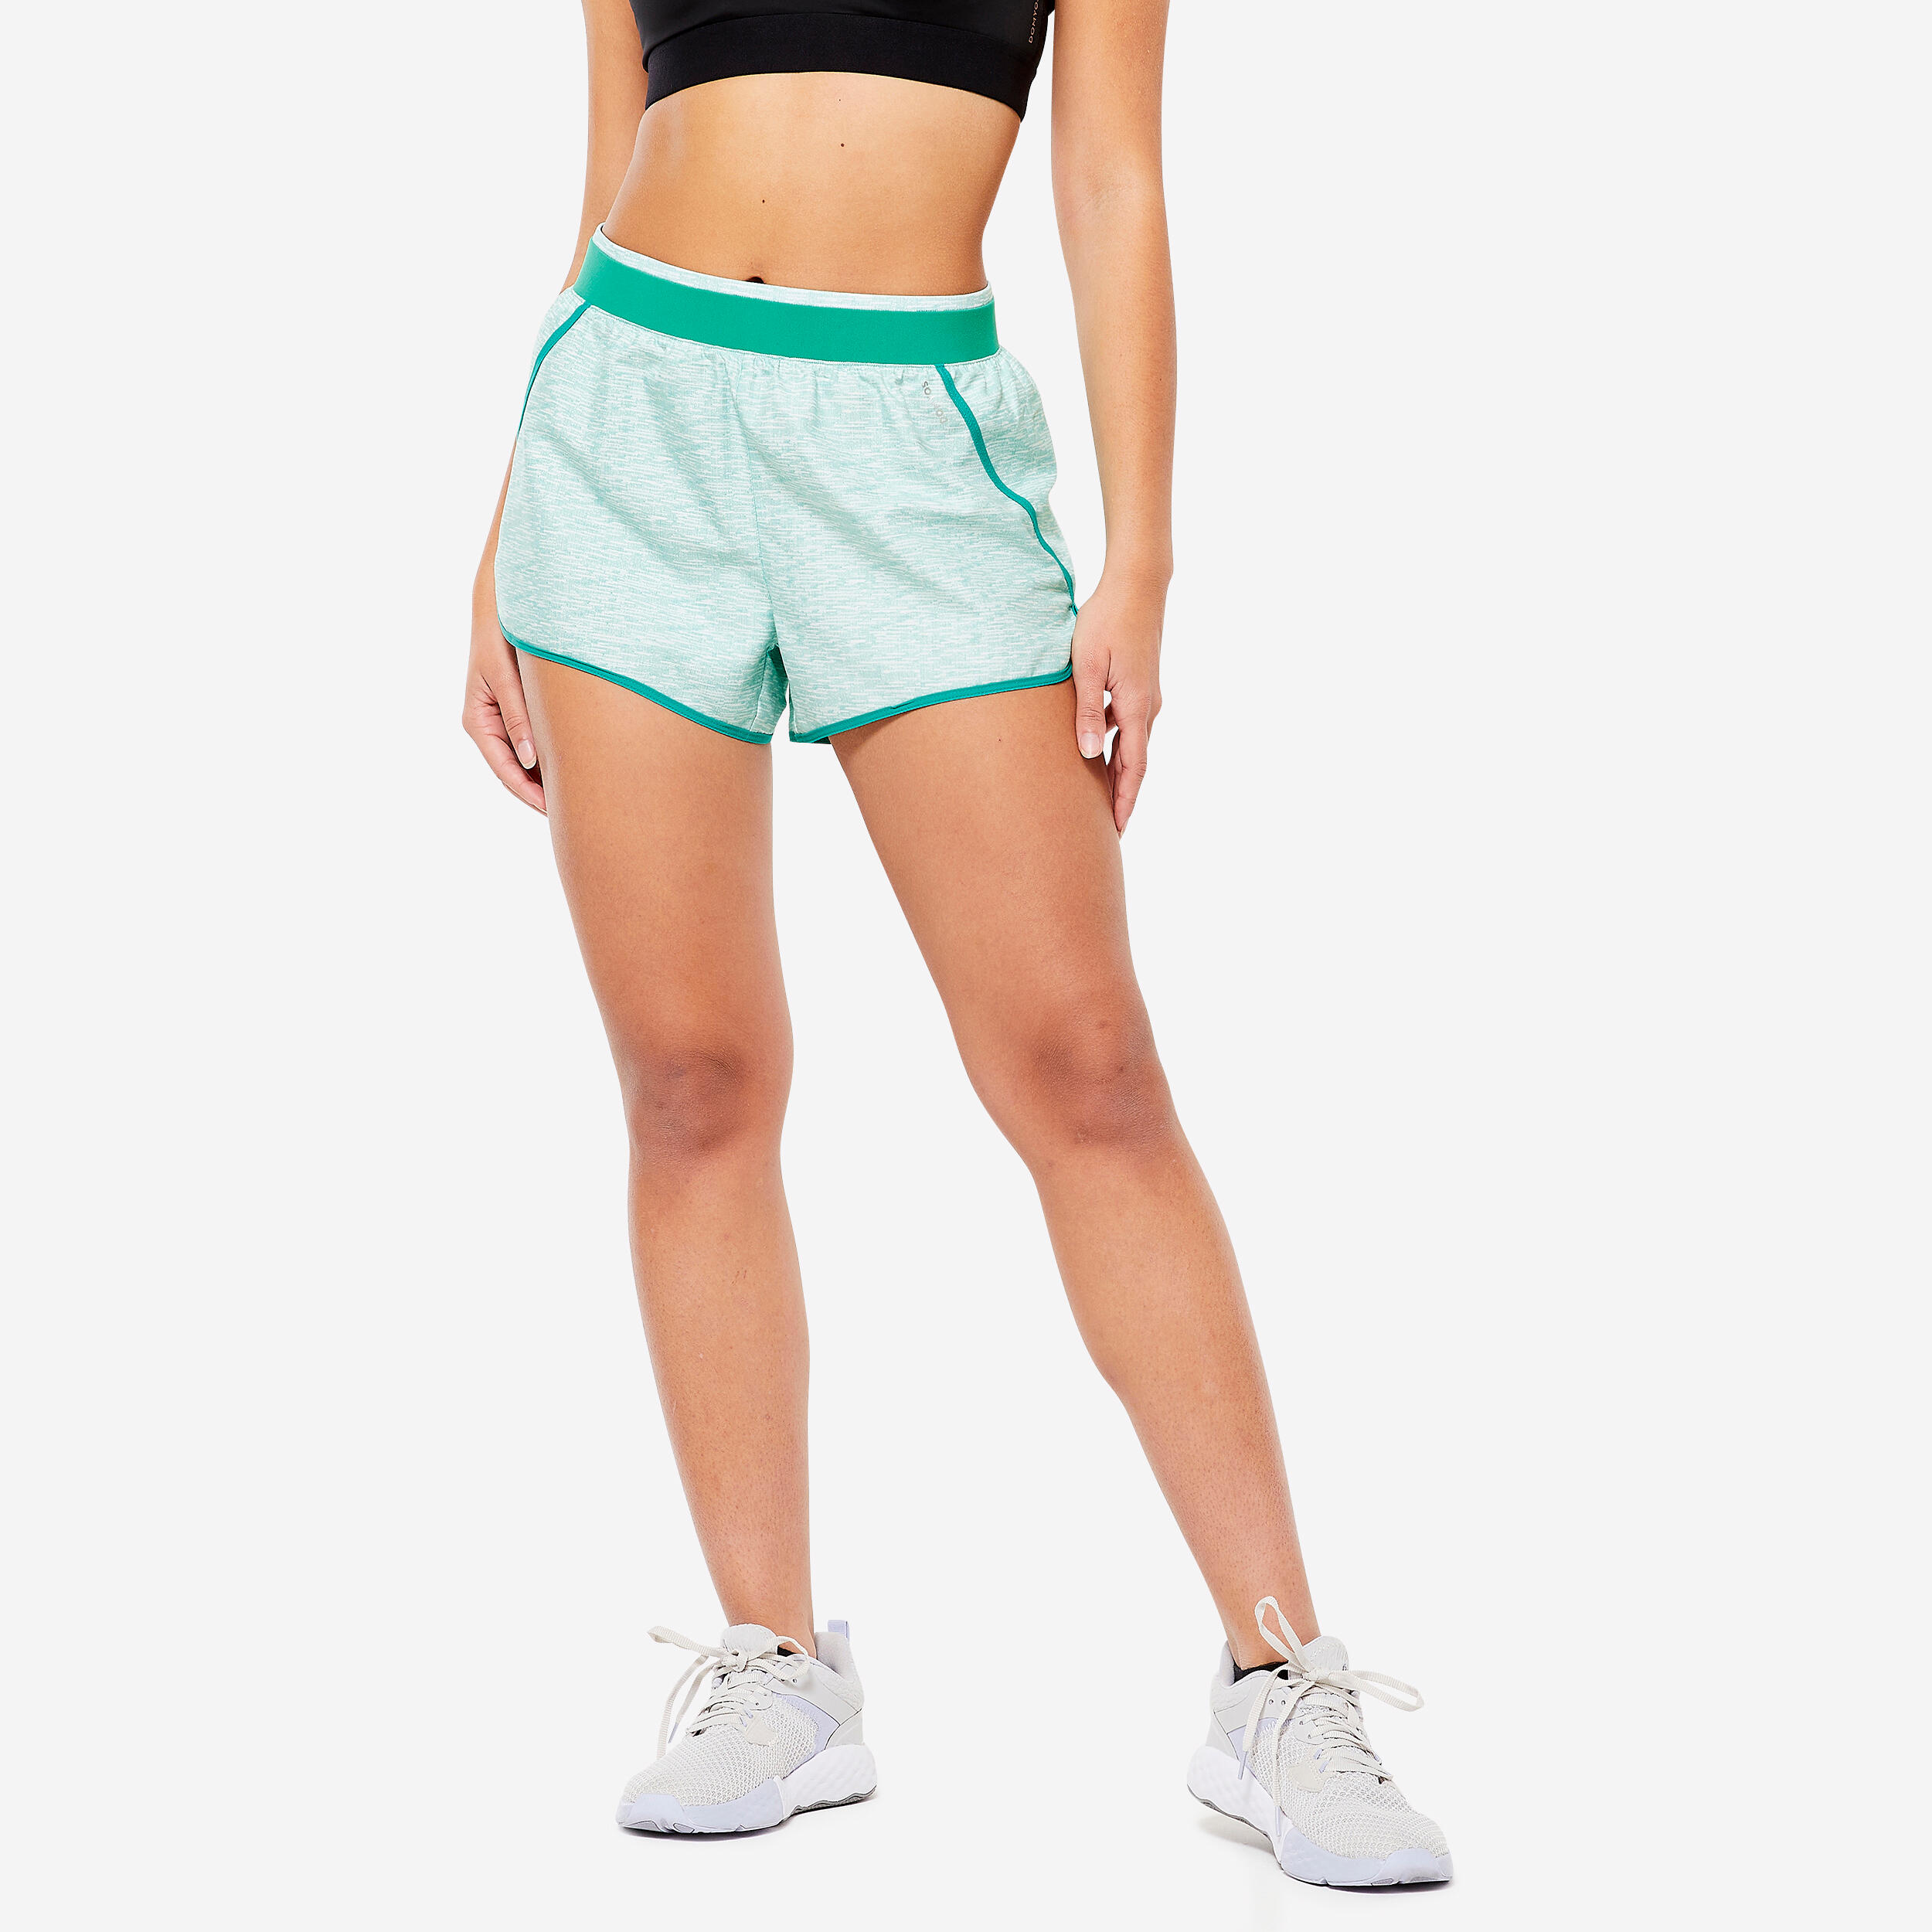 Women's Loose Fitness Shorts - Green 1/5